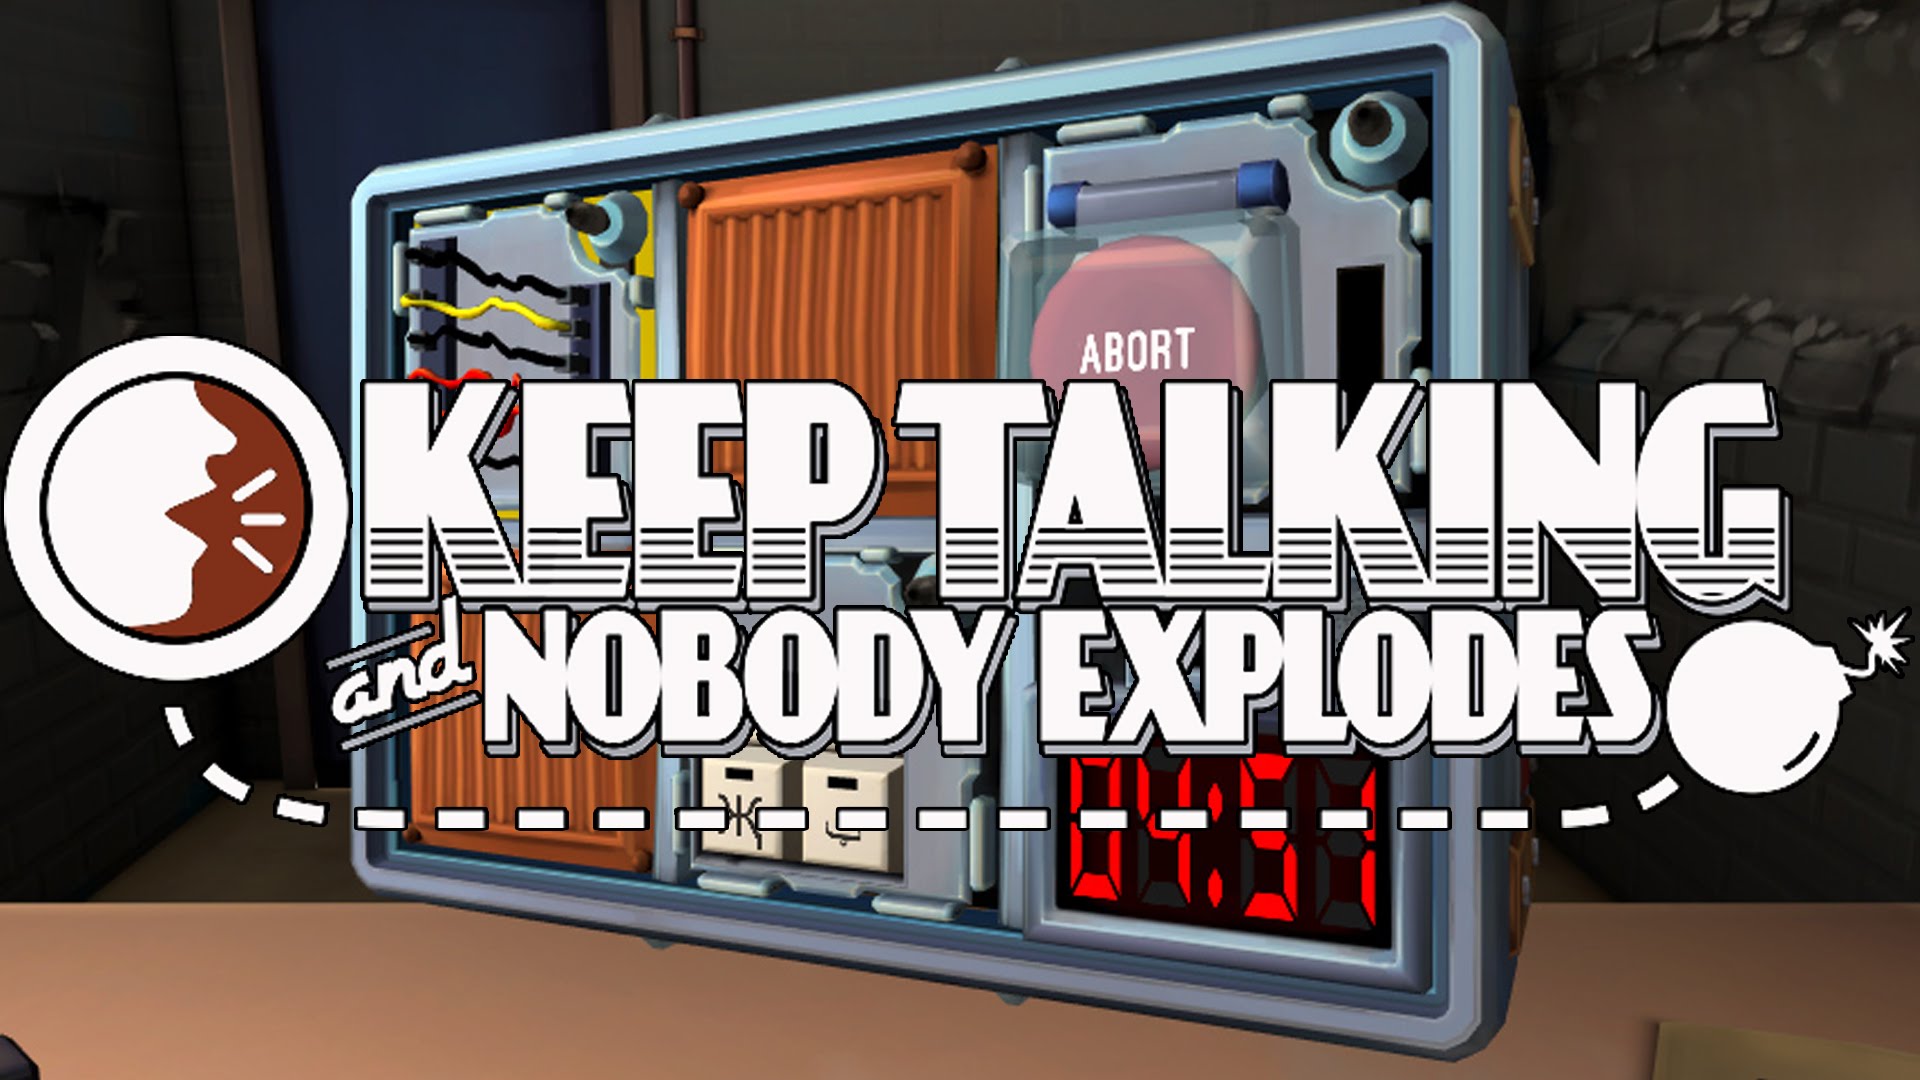 Keep Talking and Nobody Explodes.

I left a group of girls on my computer for this game 4 hours and a load of yelling later they beat over half the game.